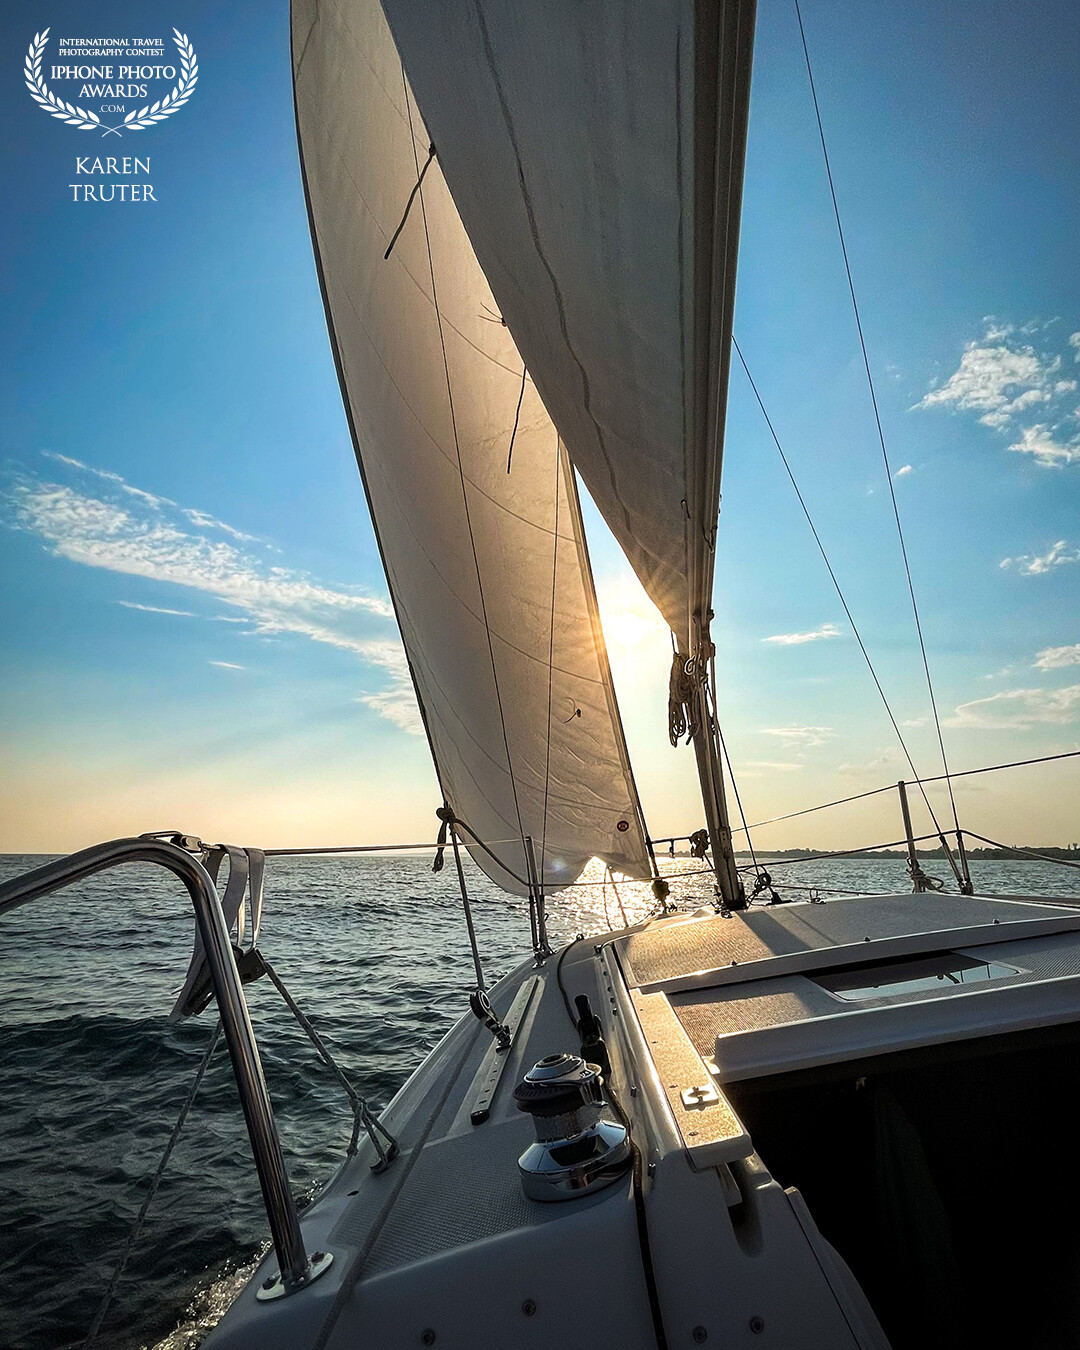 Lake Ontario, Canada. It was a sultry evening with very little wind, then, suddenly the wind picked up; our master sailor turned the boat and the sails filled like lungs breathing fresh air and we sailed into the sunset.